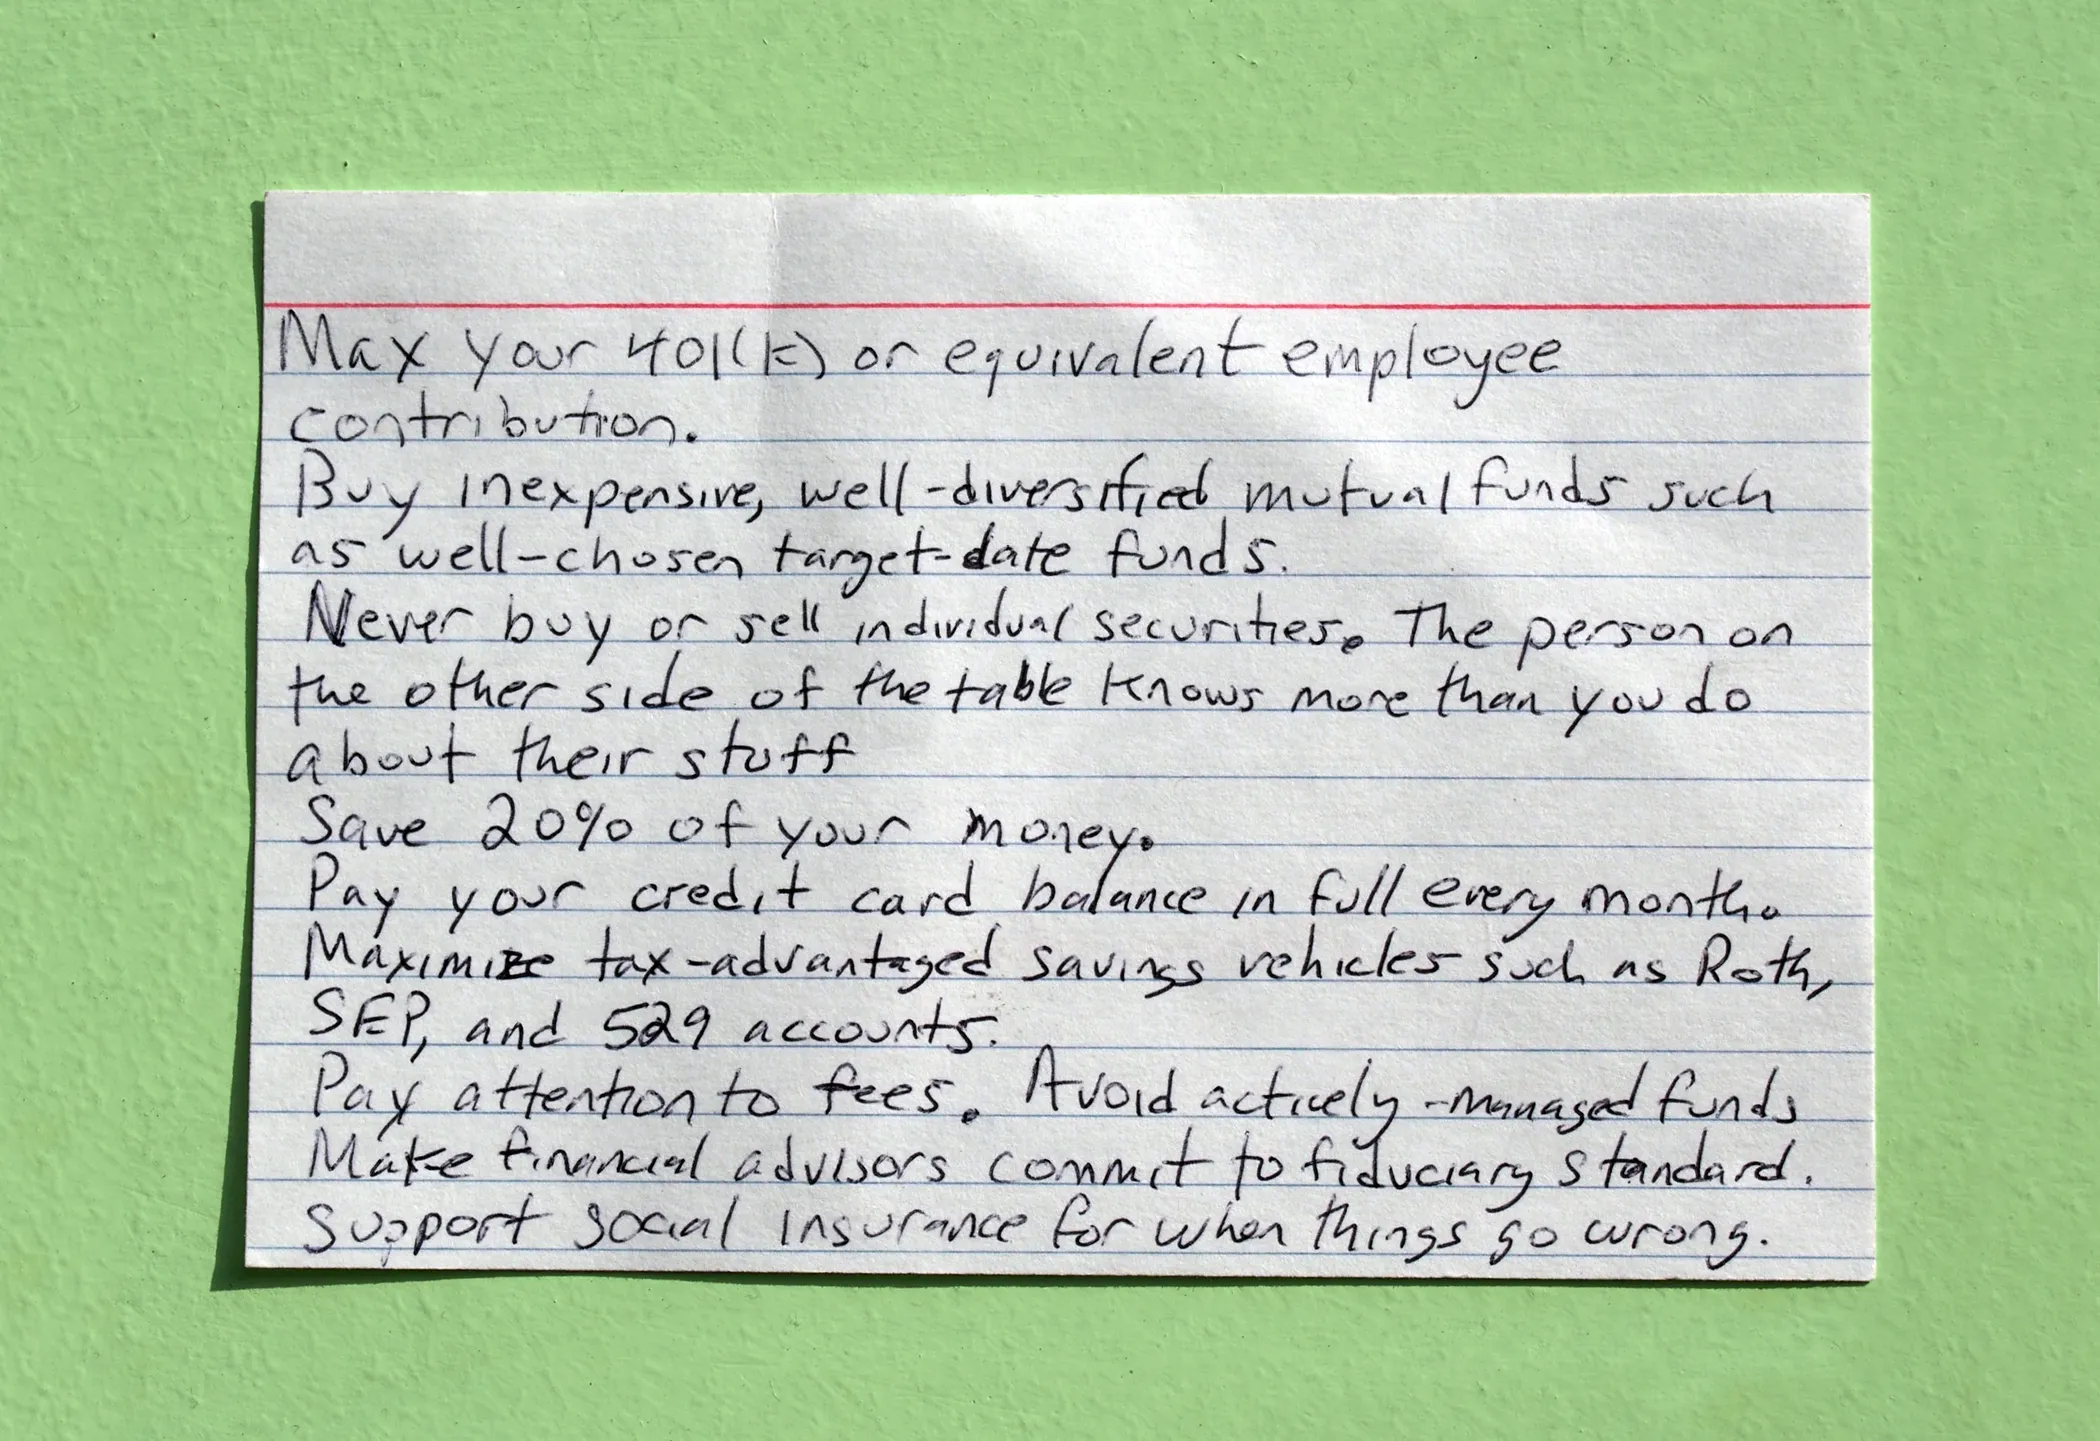 Everything You Need to Know About Money on One Index Card